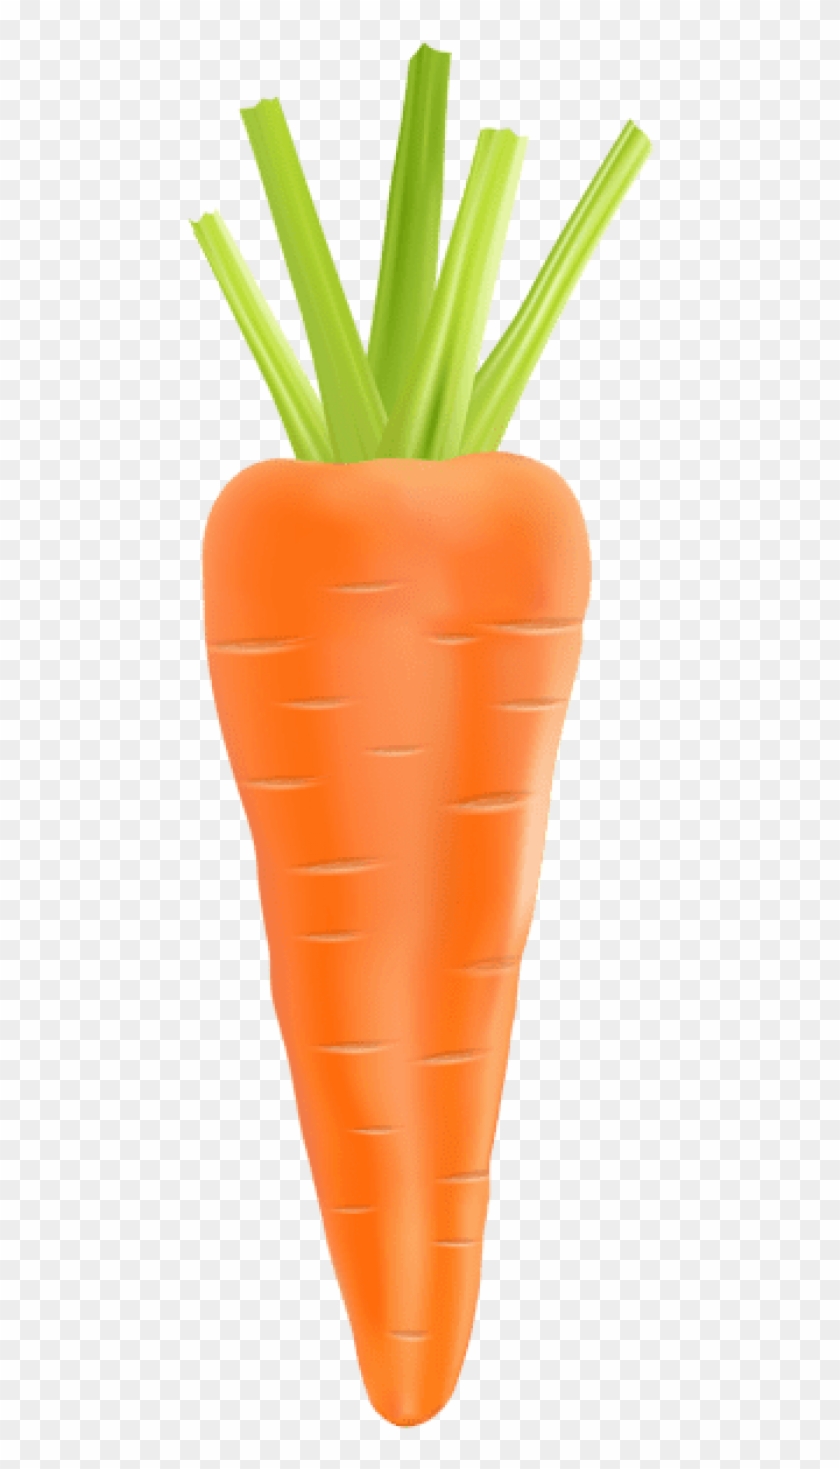 Free Png Download Carrot Transparent Png Images Background Transparent Background Carrot Clipart Png Download 480x1399 Pngfind